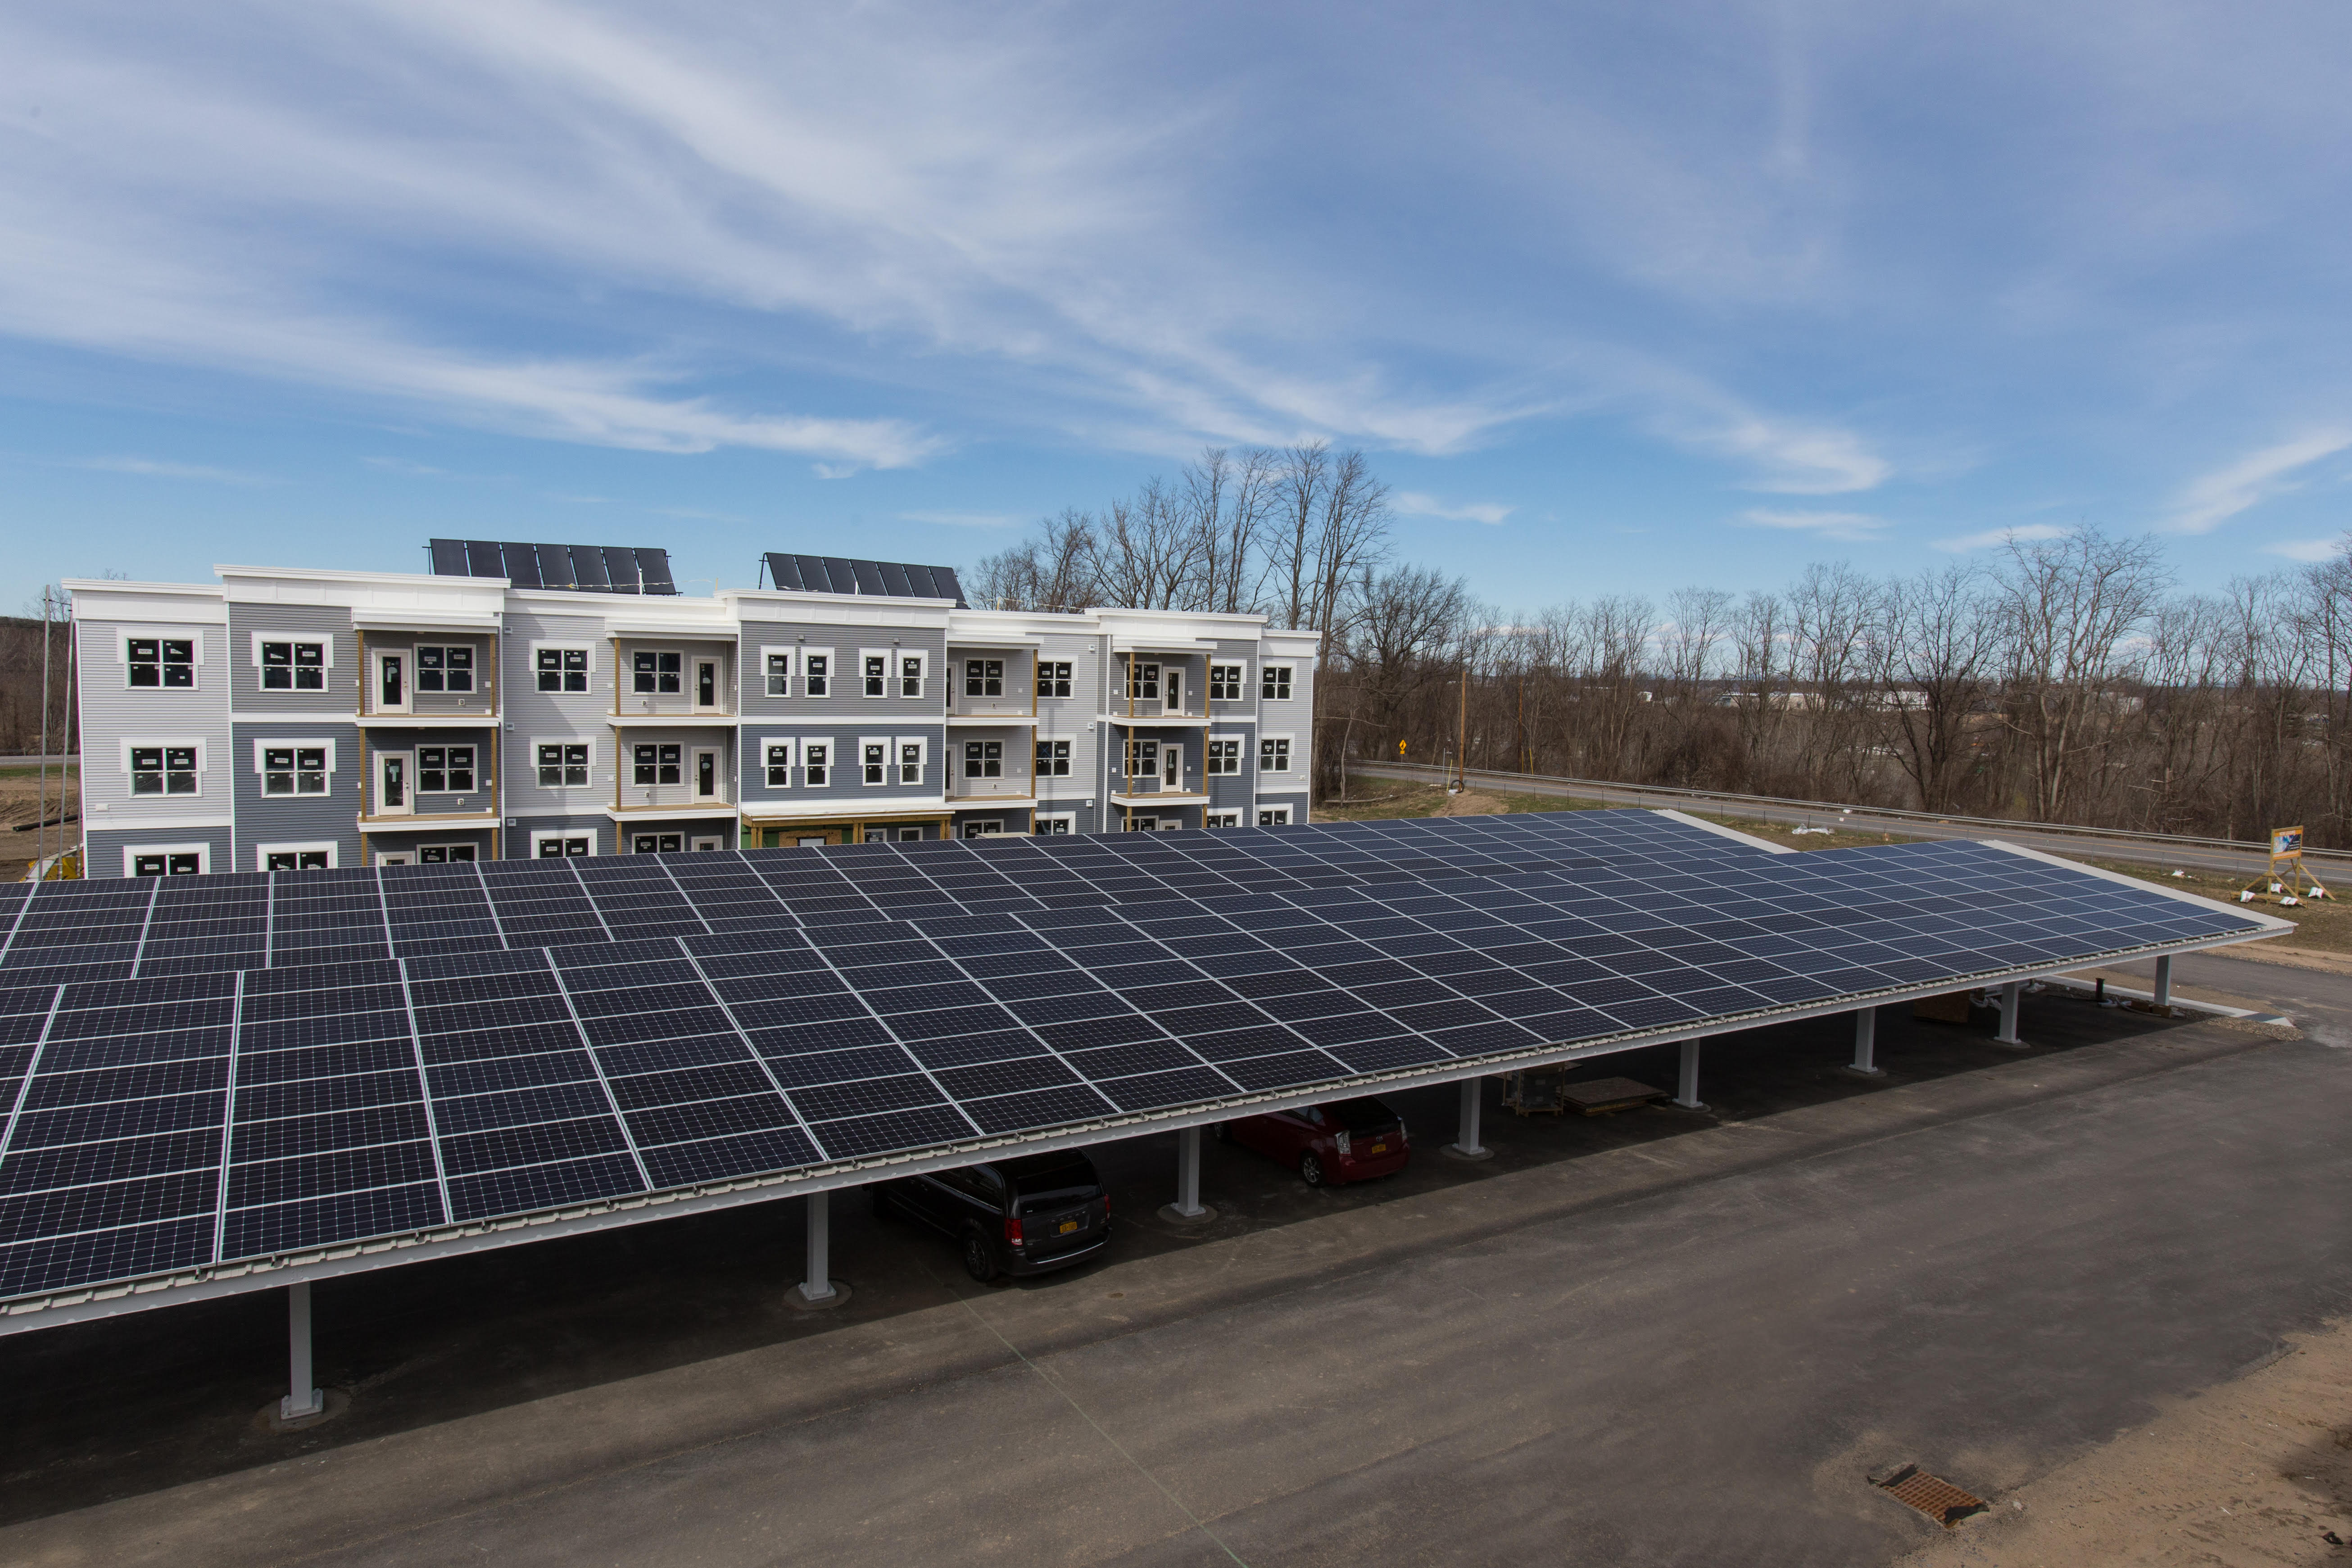 Photo of parking lot covered with solar panels with an apartment complex in the background